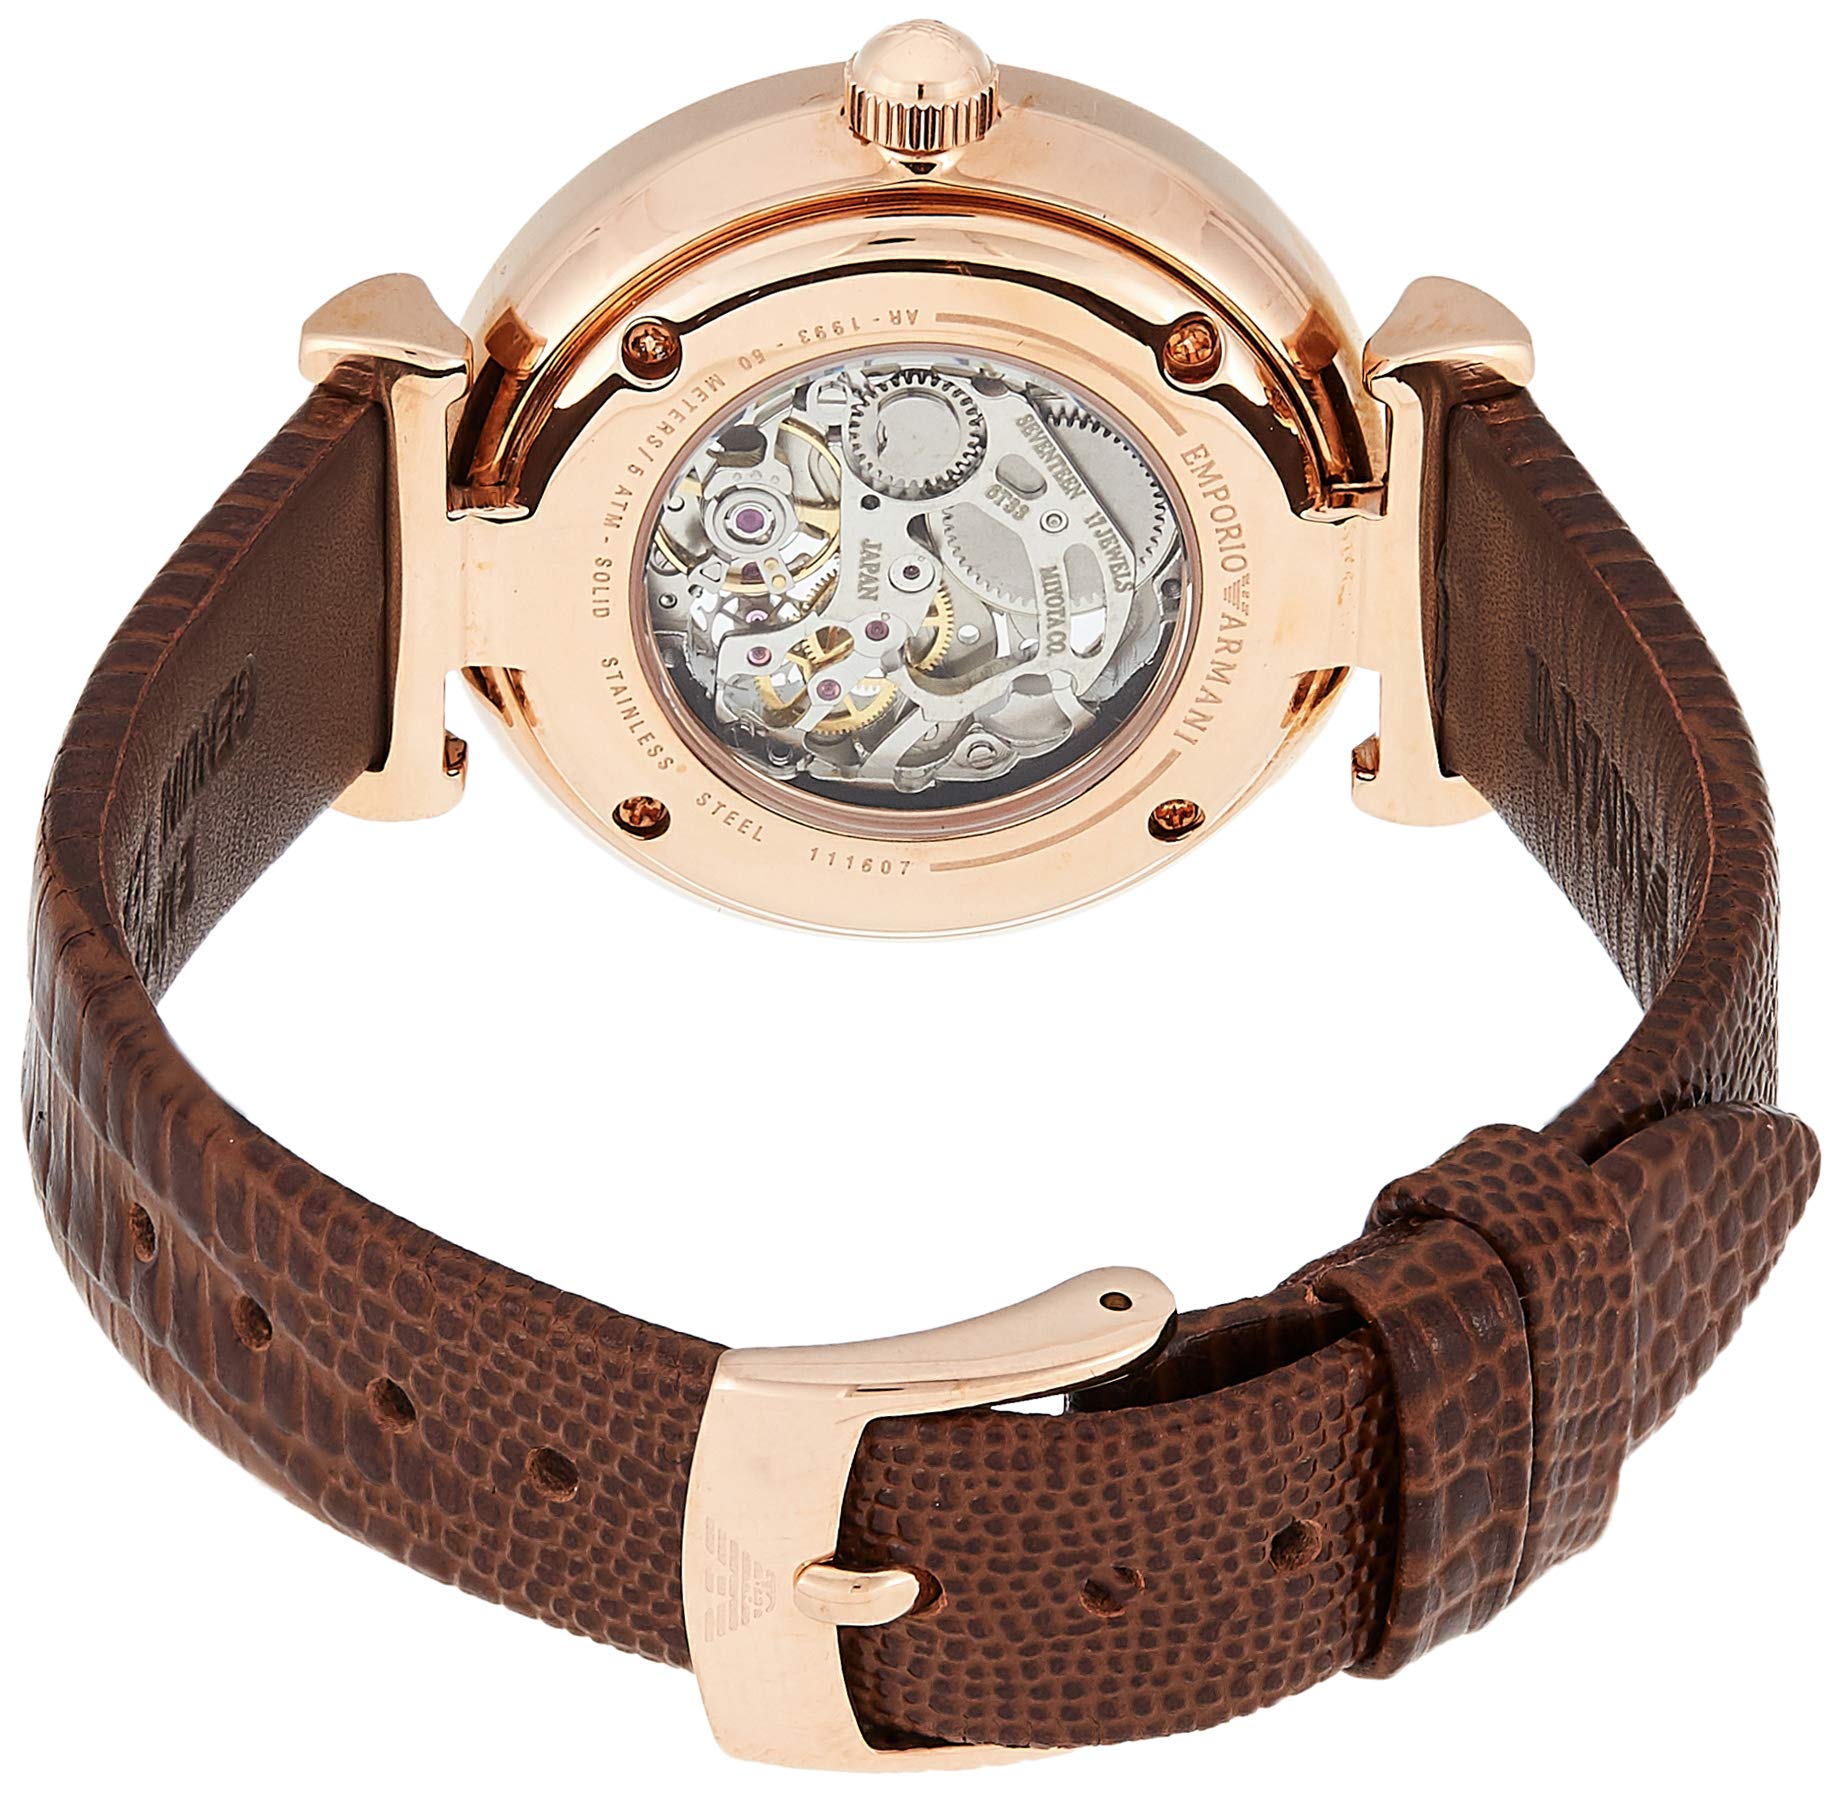 Emporio Armani Meccanico Skeleton Mother of Pearl Dial Brown Leather Strap Watch For Women - AR1993